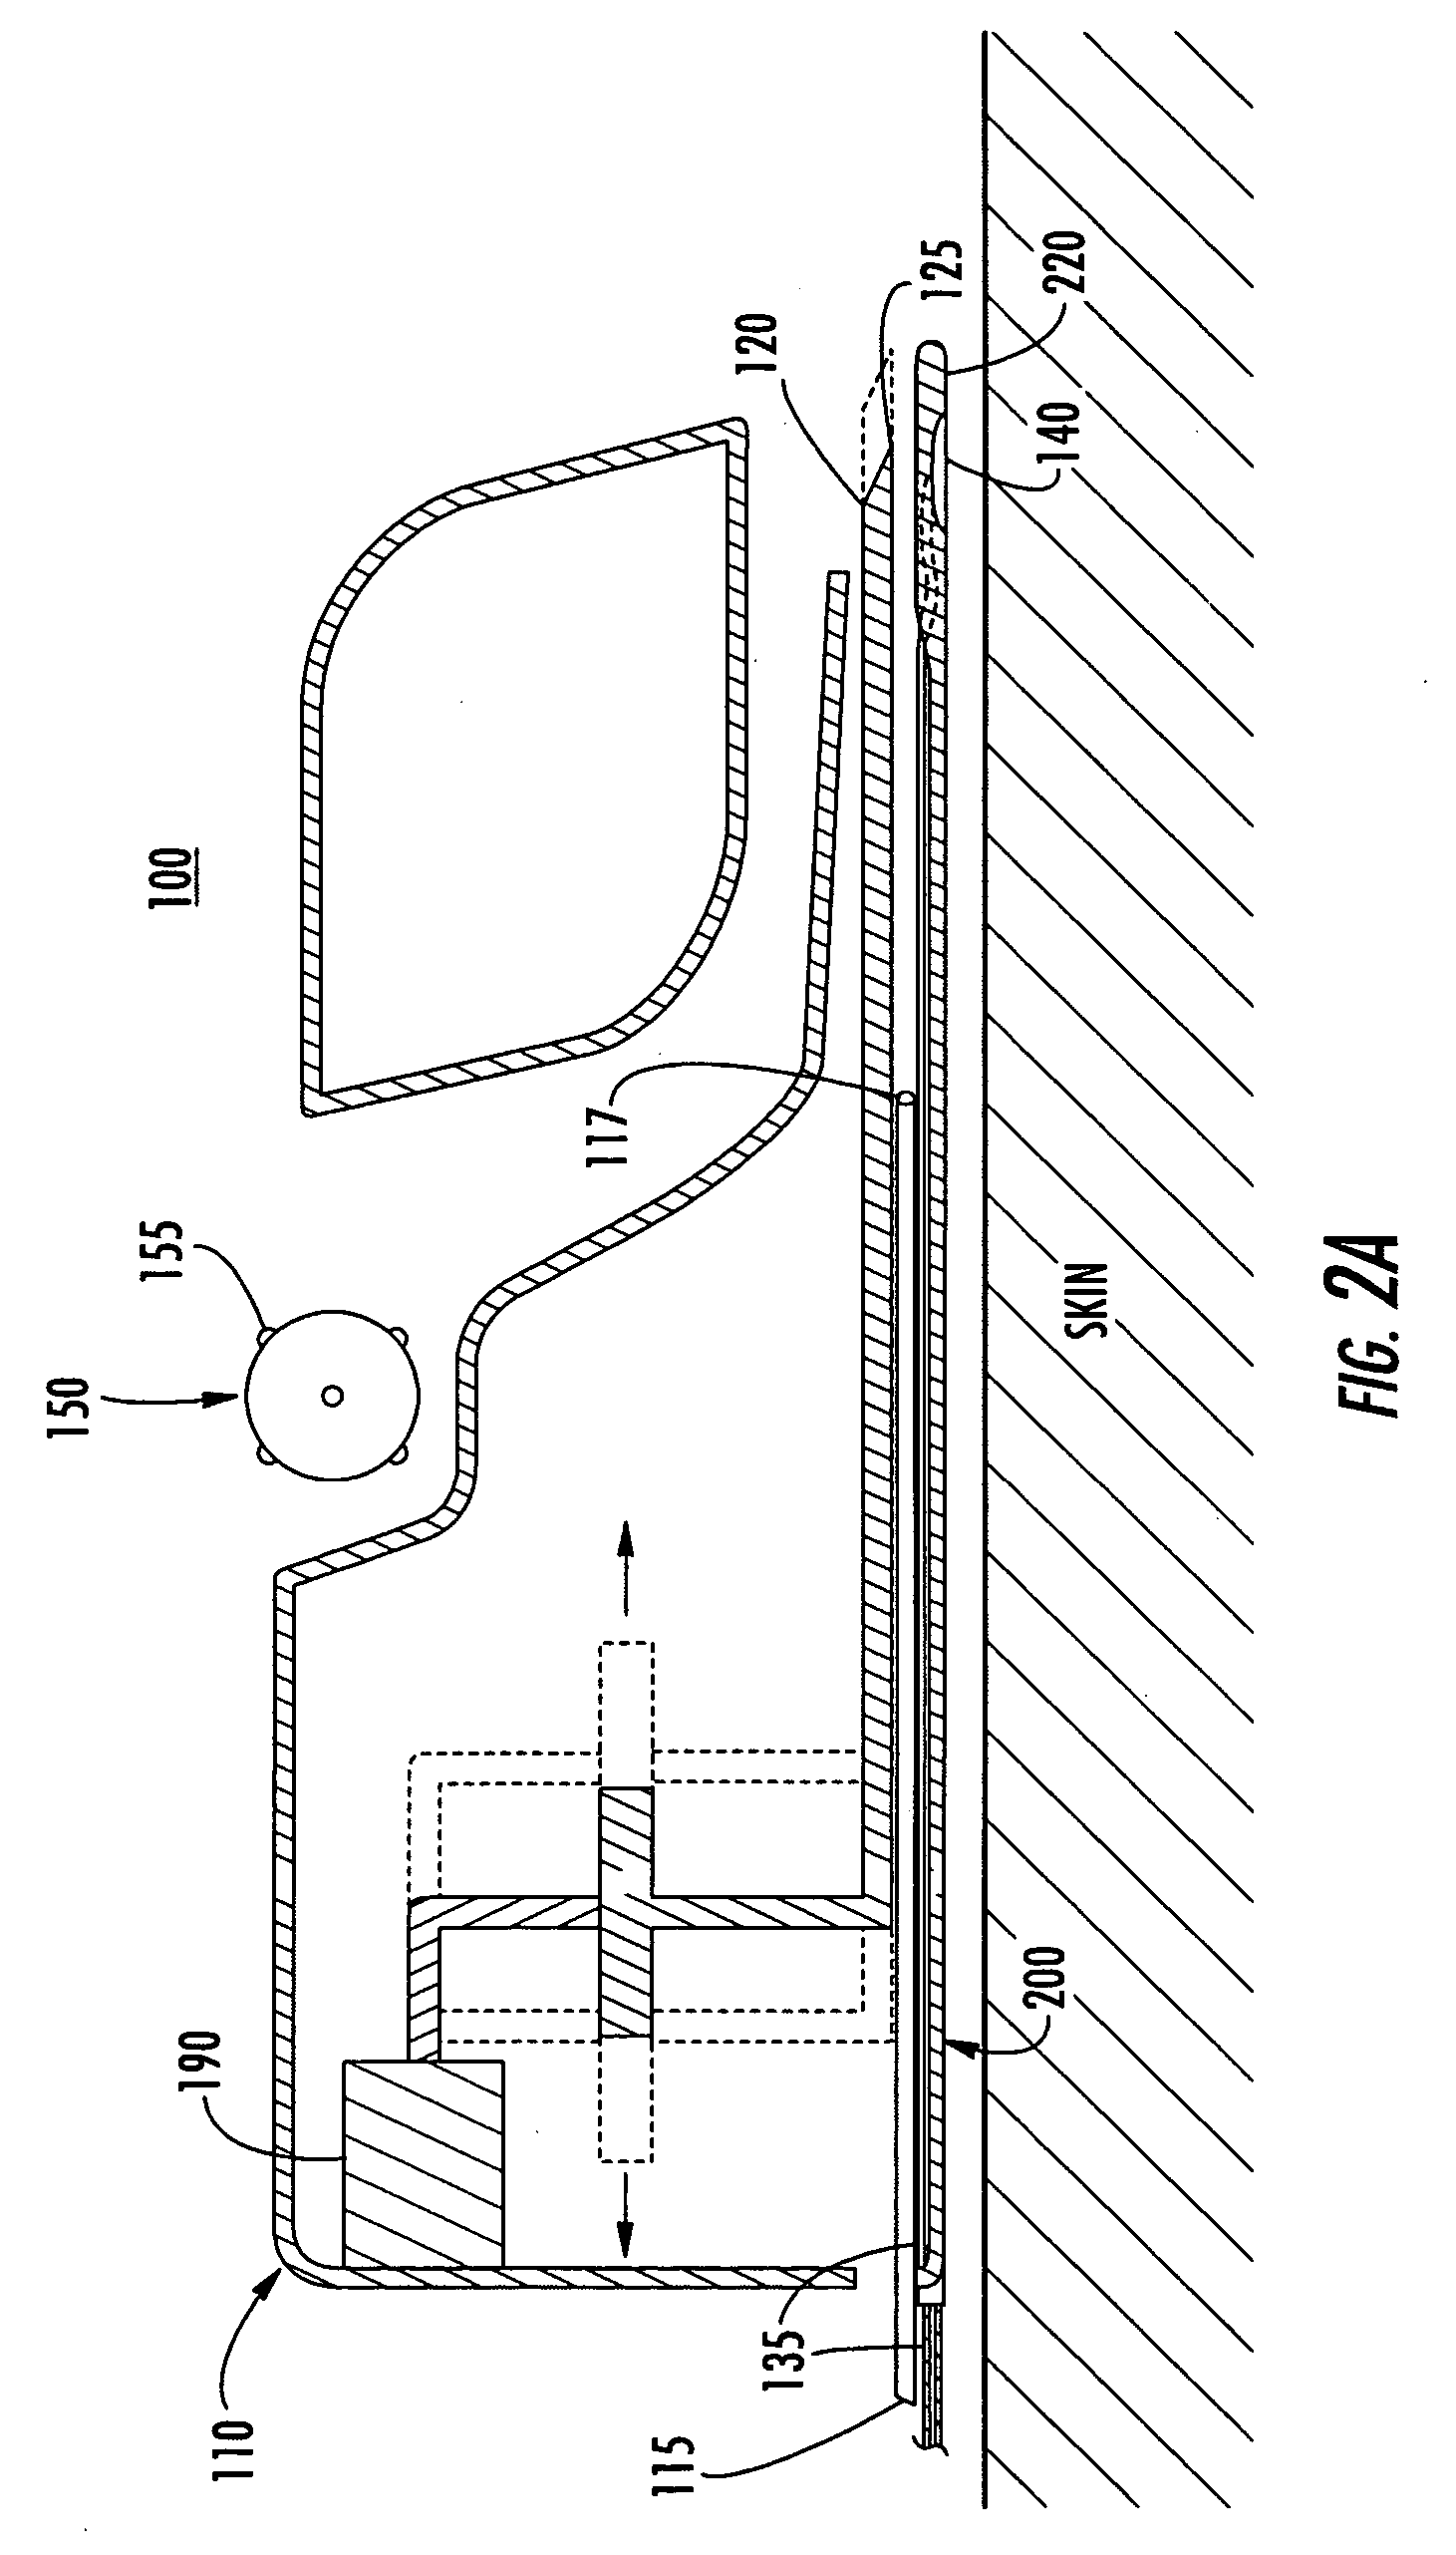 Devices and systems for separating and preparing skin